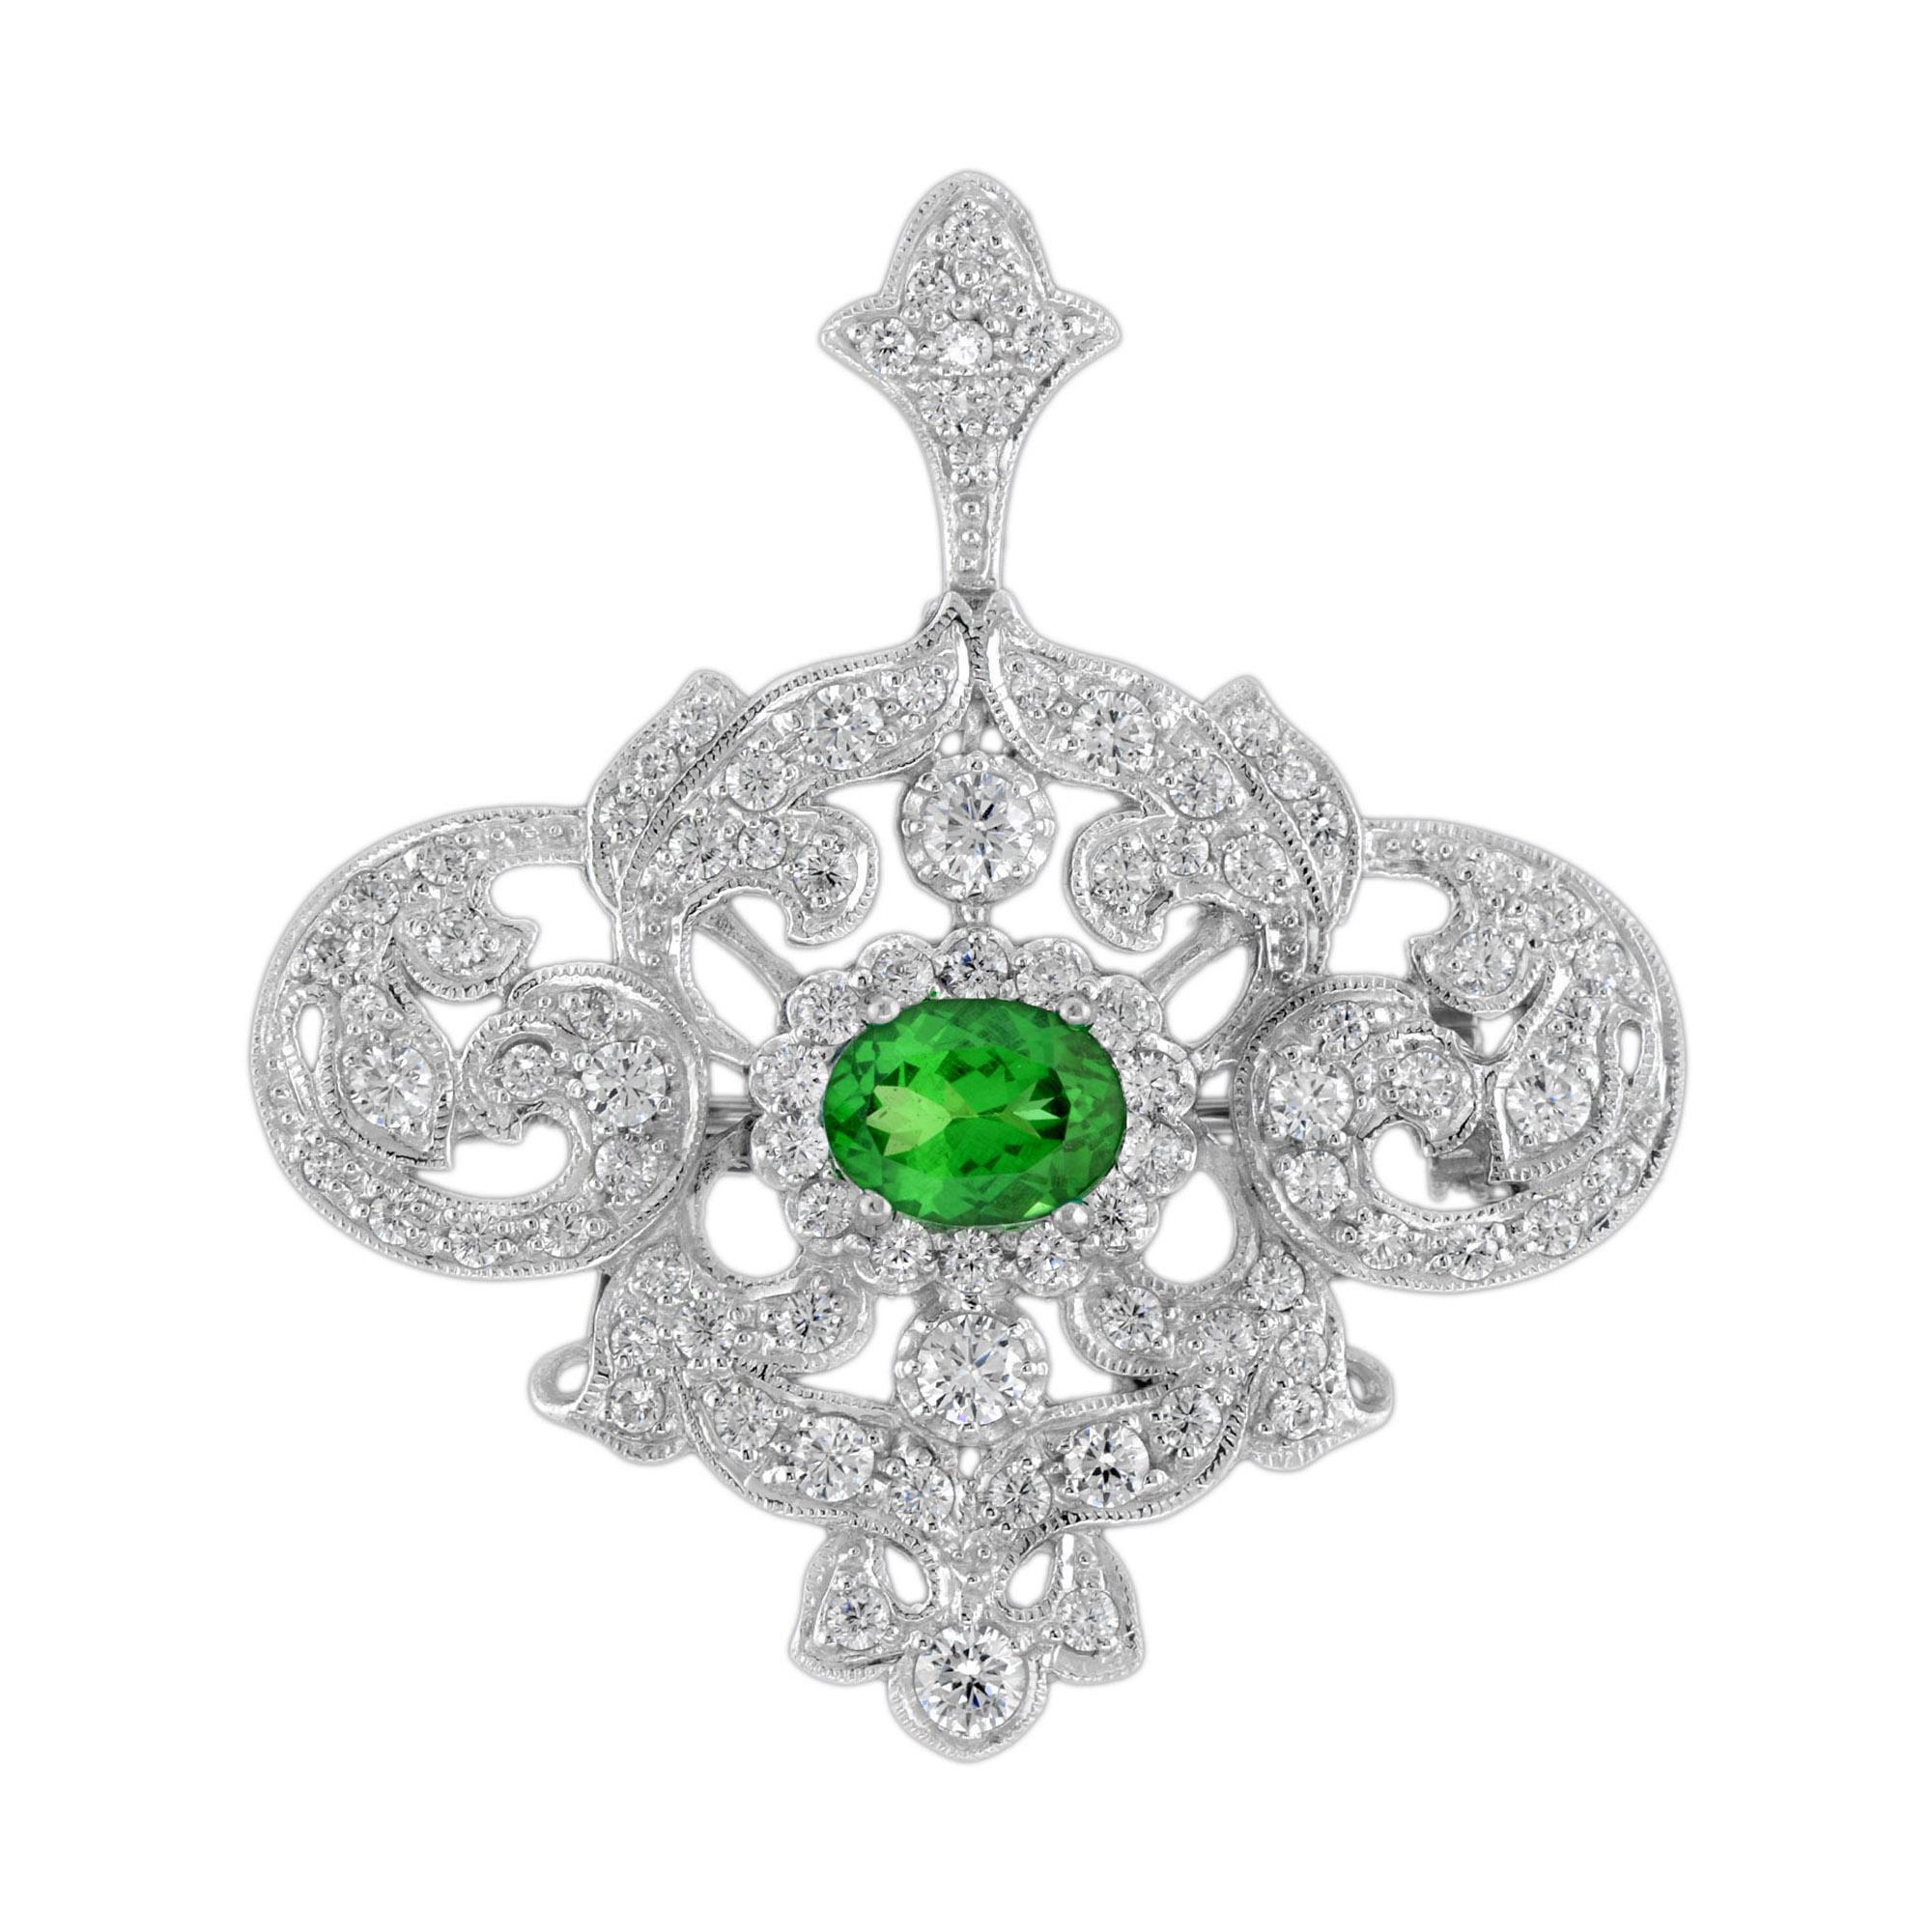 This is an impressive vintage inspired brooch pendant set in 18k white gold featuring a gorgeous oval cut green tsavorite gemstone measuring 8 x 6 mm. The brooch is further set with stunning round cut diamonds of H color and SI clarity. Super